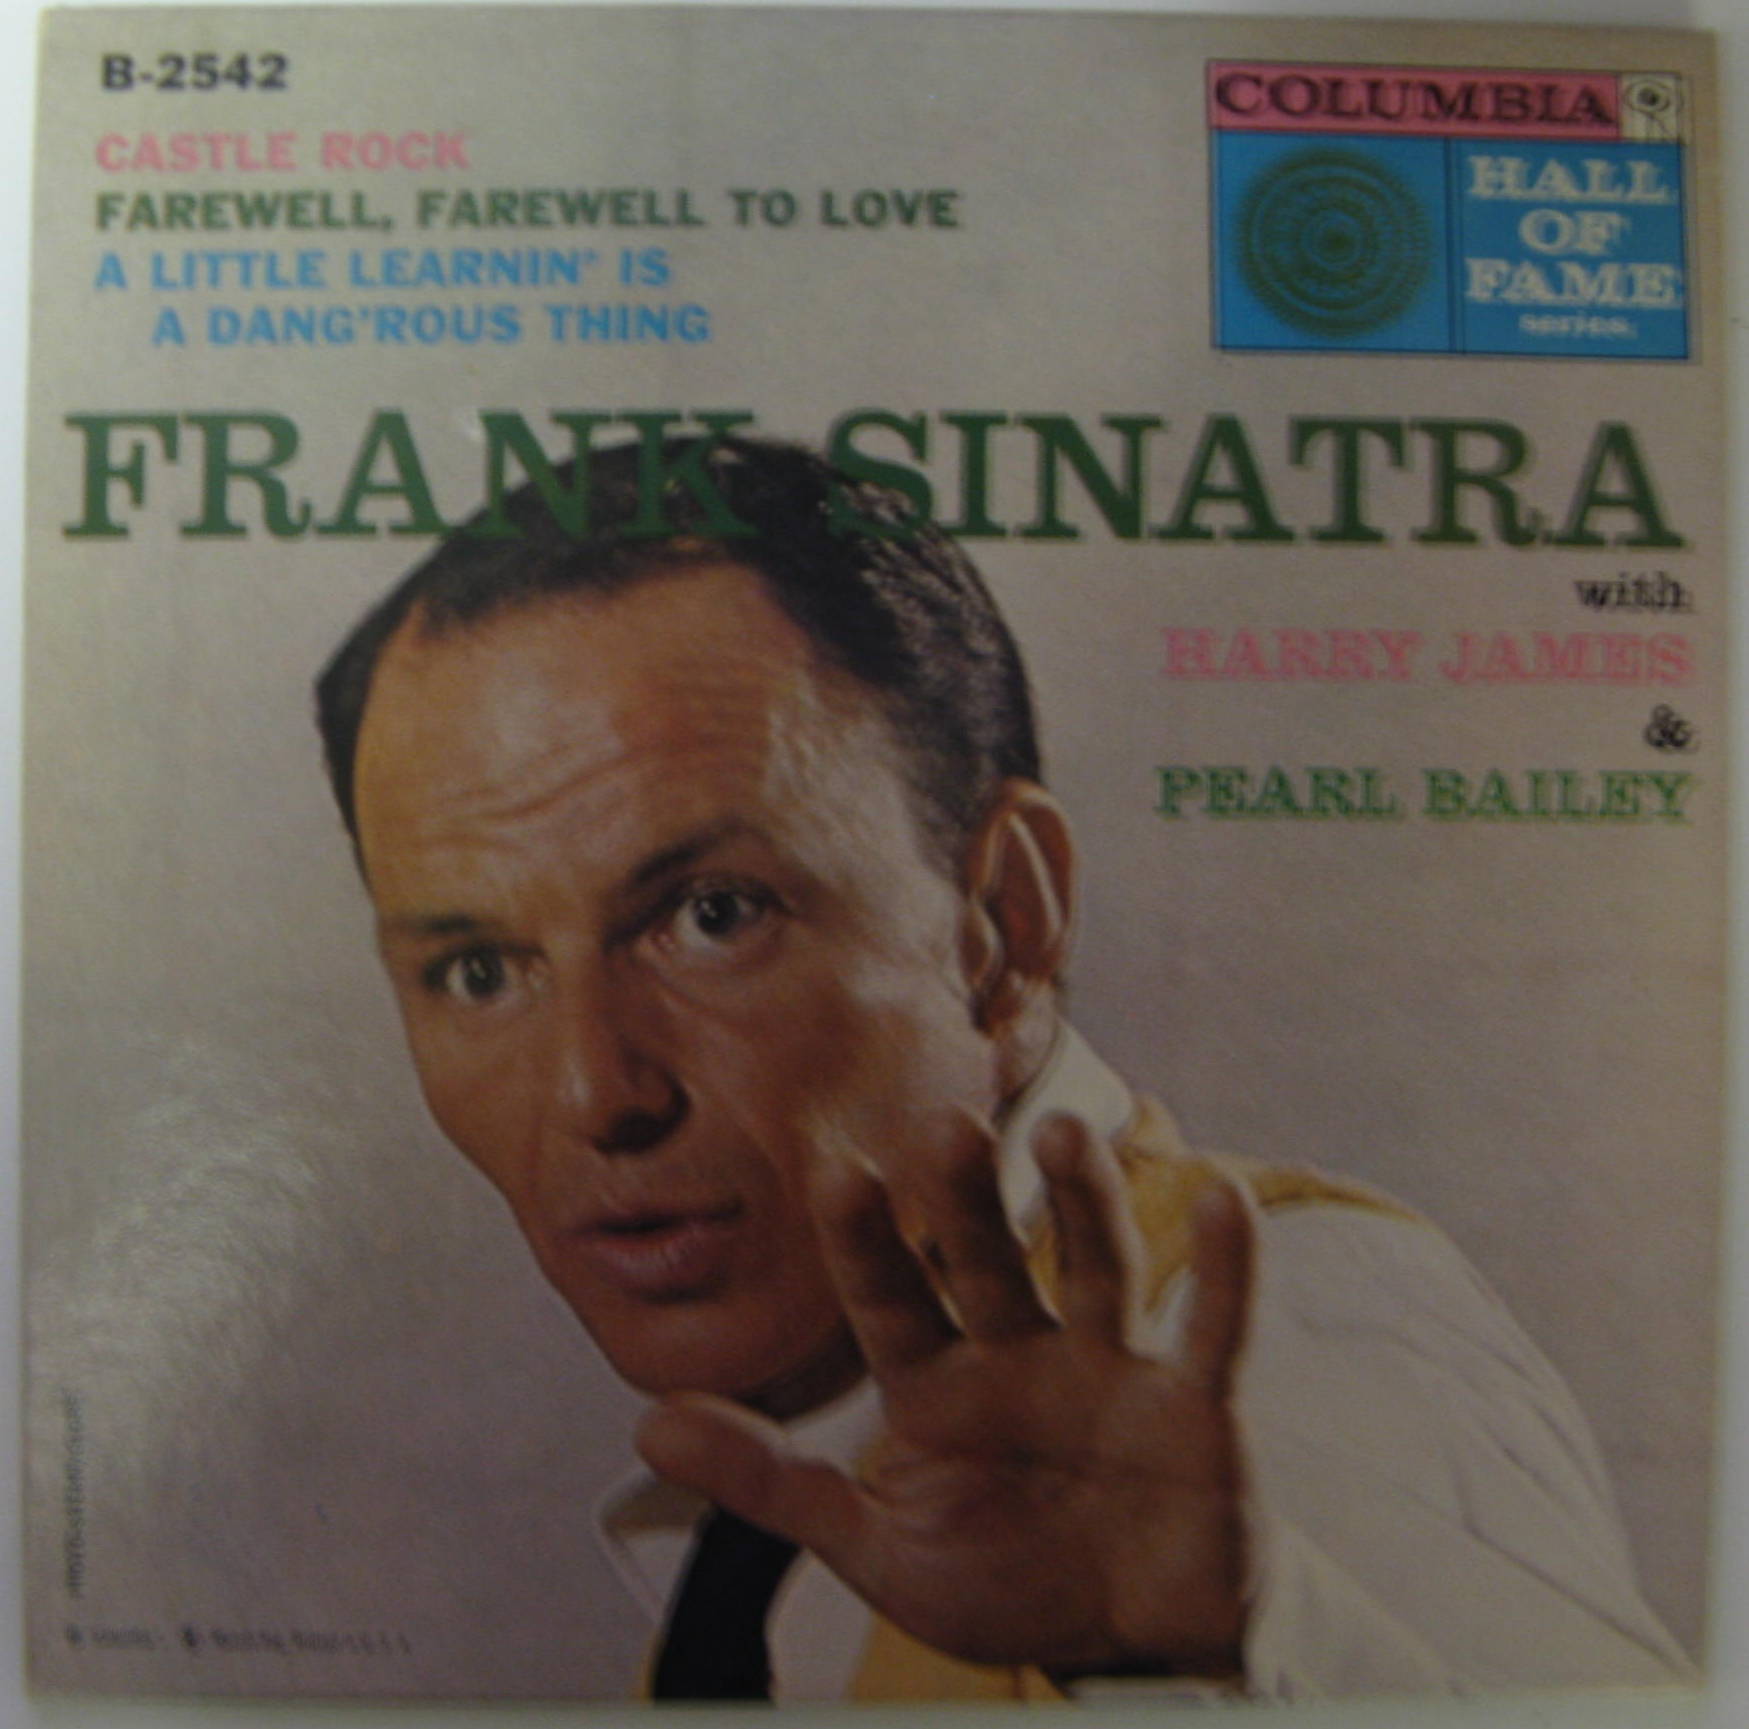 Frank Sinatra / With Harry James & Pearl Bailey EP